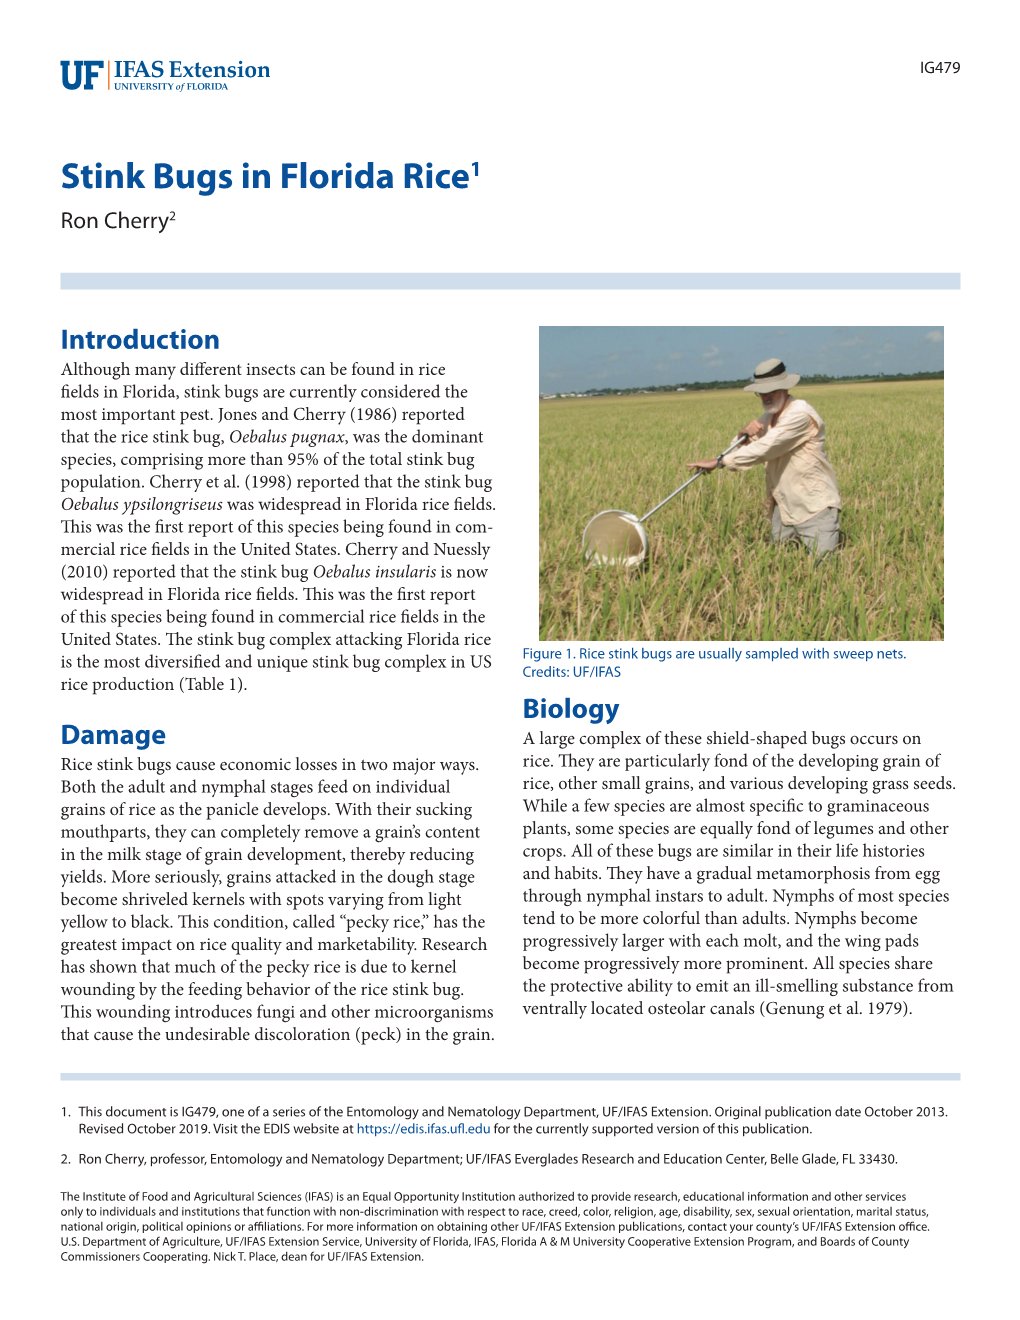 Stink Bugs in Florida Rice1 Ron Cherry2